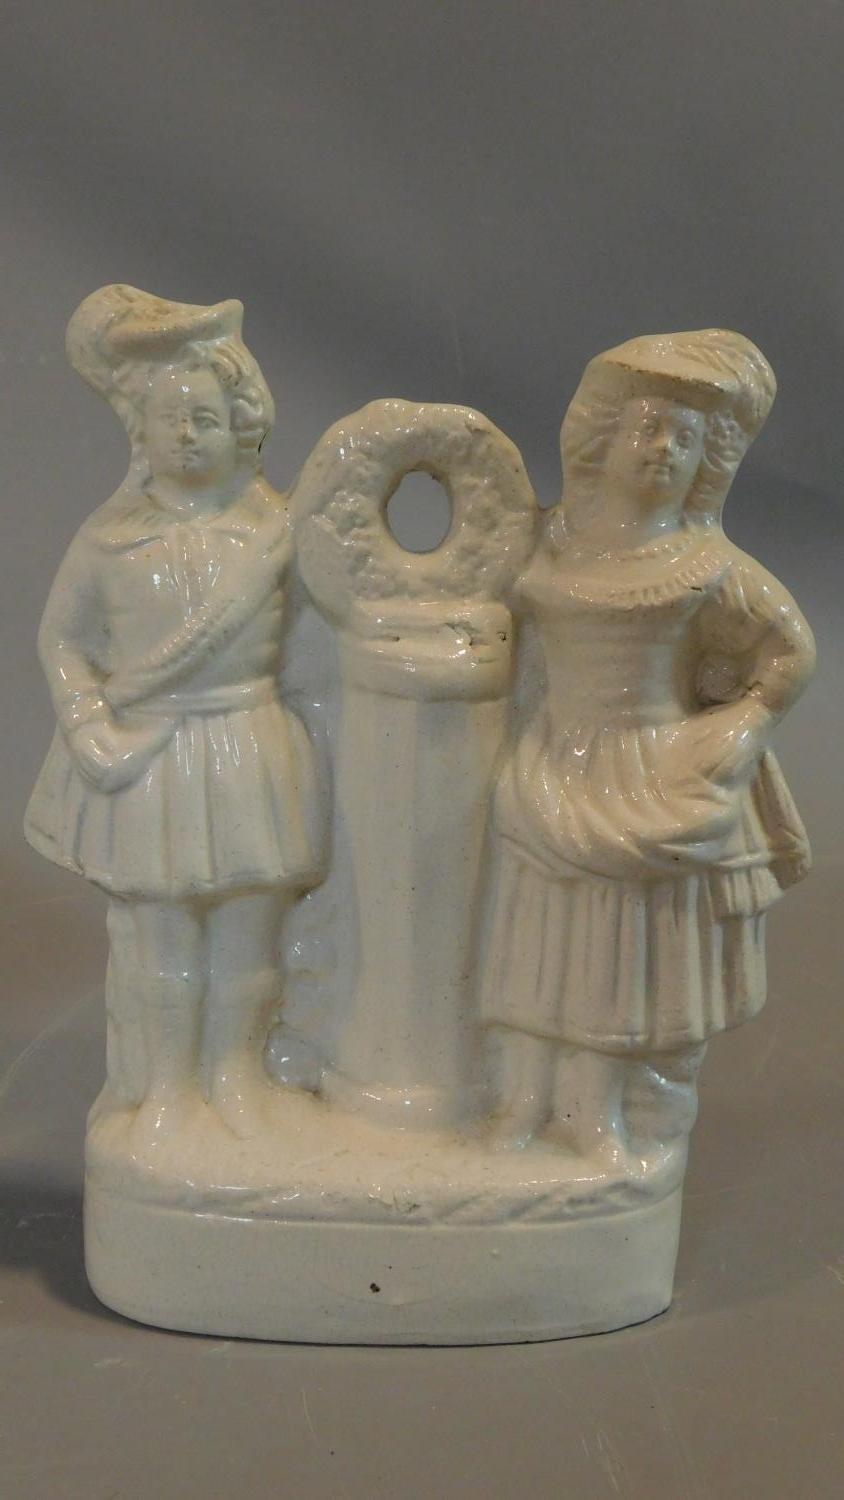 A collection of five early porcelain and earthenware figures, including a man with a bill, a - Image 5 of 8